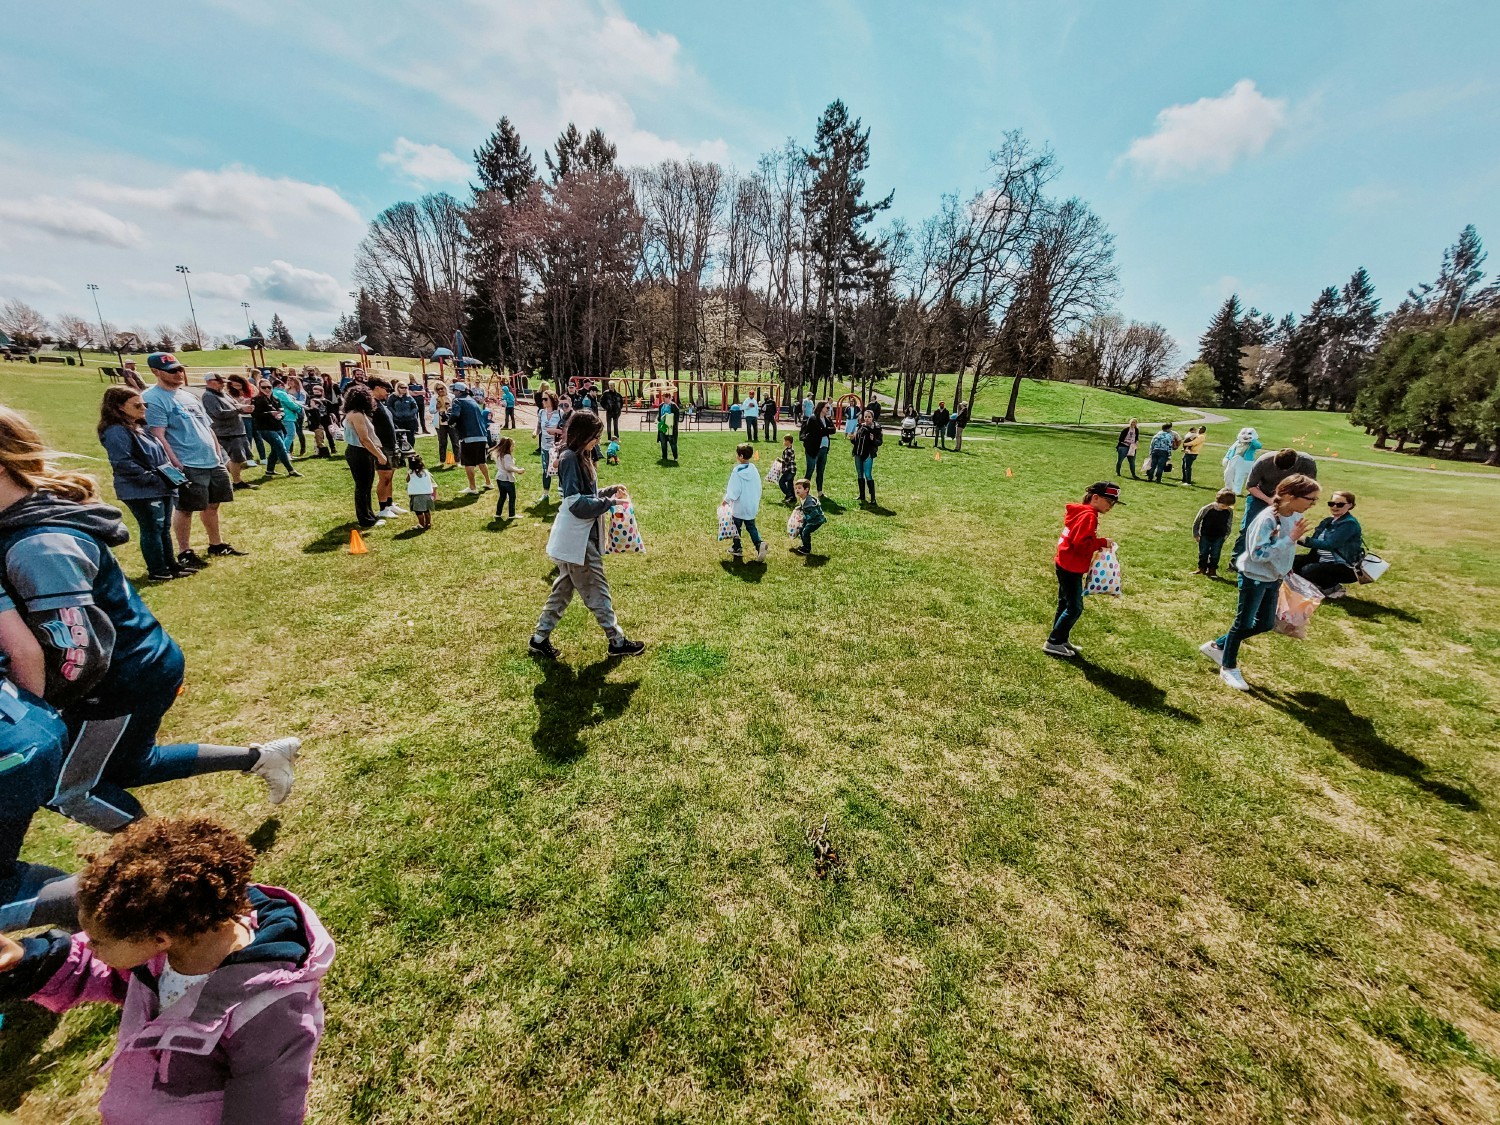 We believe in prioritizing fun! Our kid & adult Easter Egg Hunt was a highlight this spring for our employees' families.